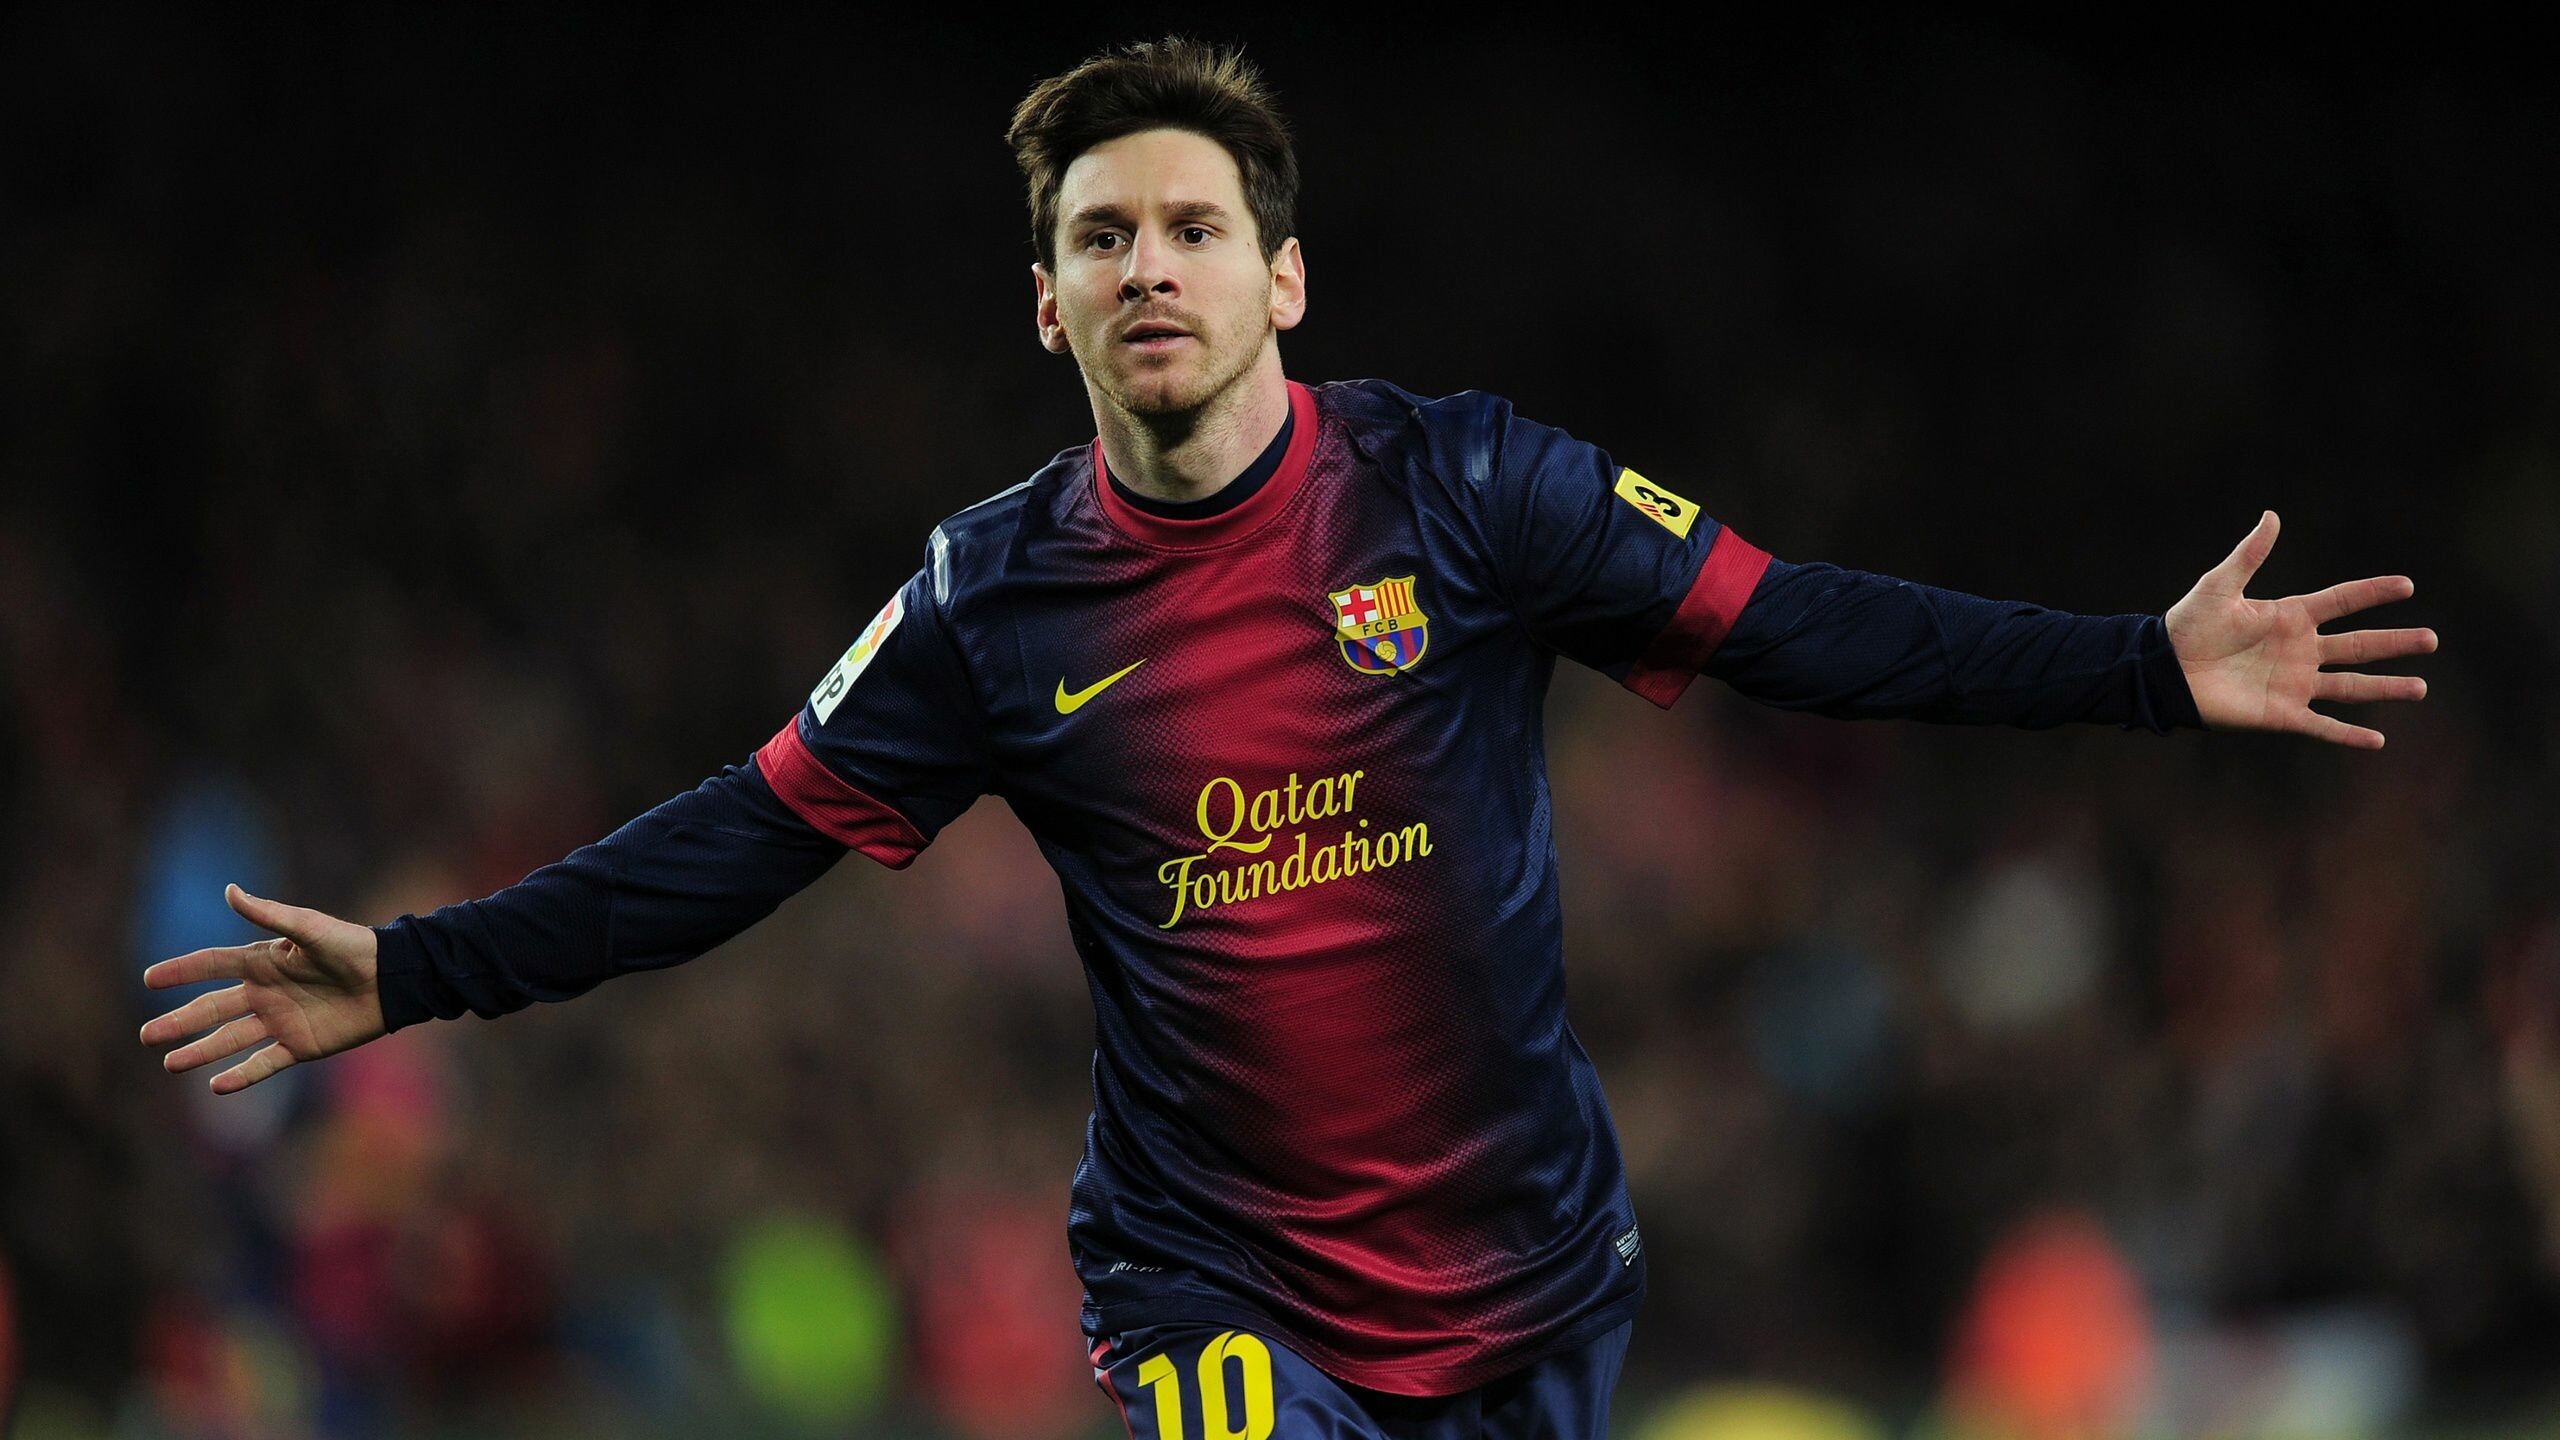 Lionel Messi, HD wallpapers, Football icon, Record-breaking career, 2560x1440 HD Desktop